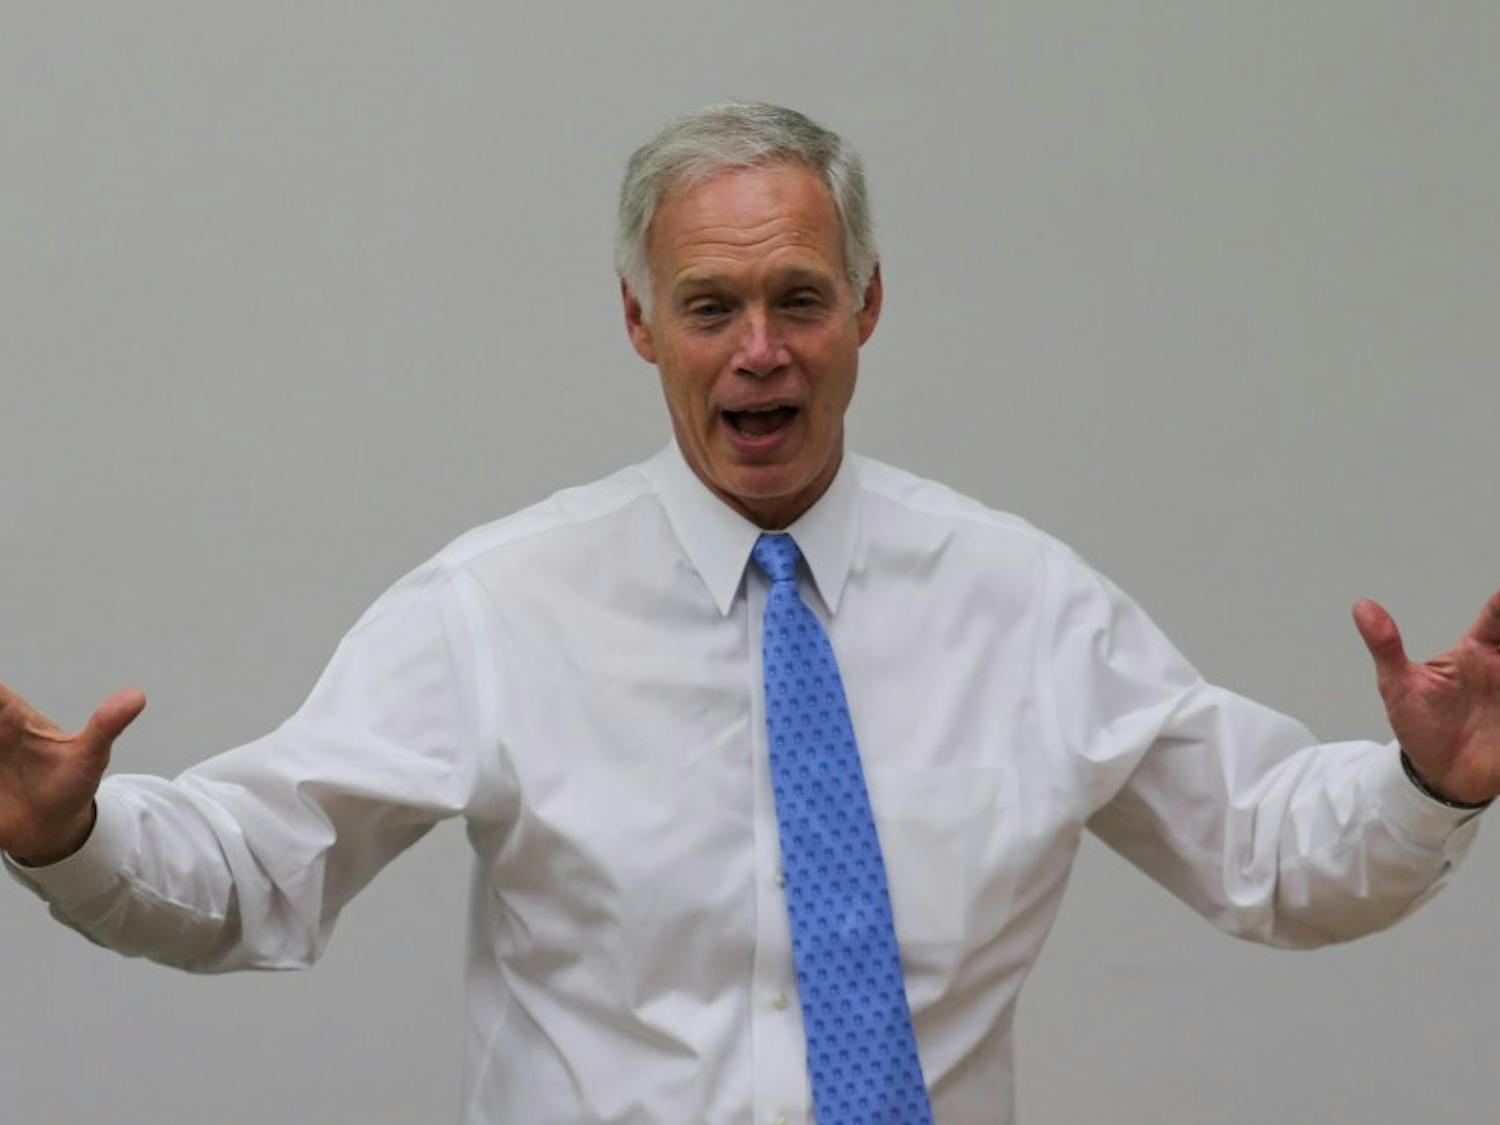 U.S. Sen. Ron Johnson, R-Wis., will buy ads on Snapchat in an effort to boost his&nbsp;re-election bid against Democrat Russ Feingold.